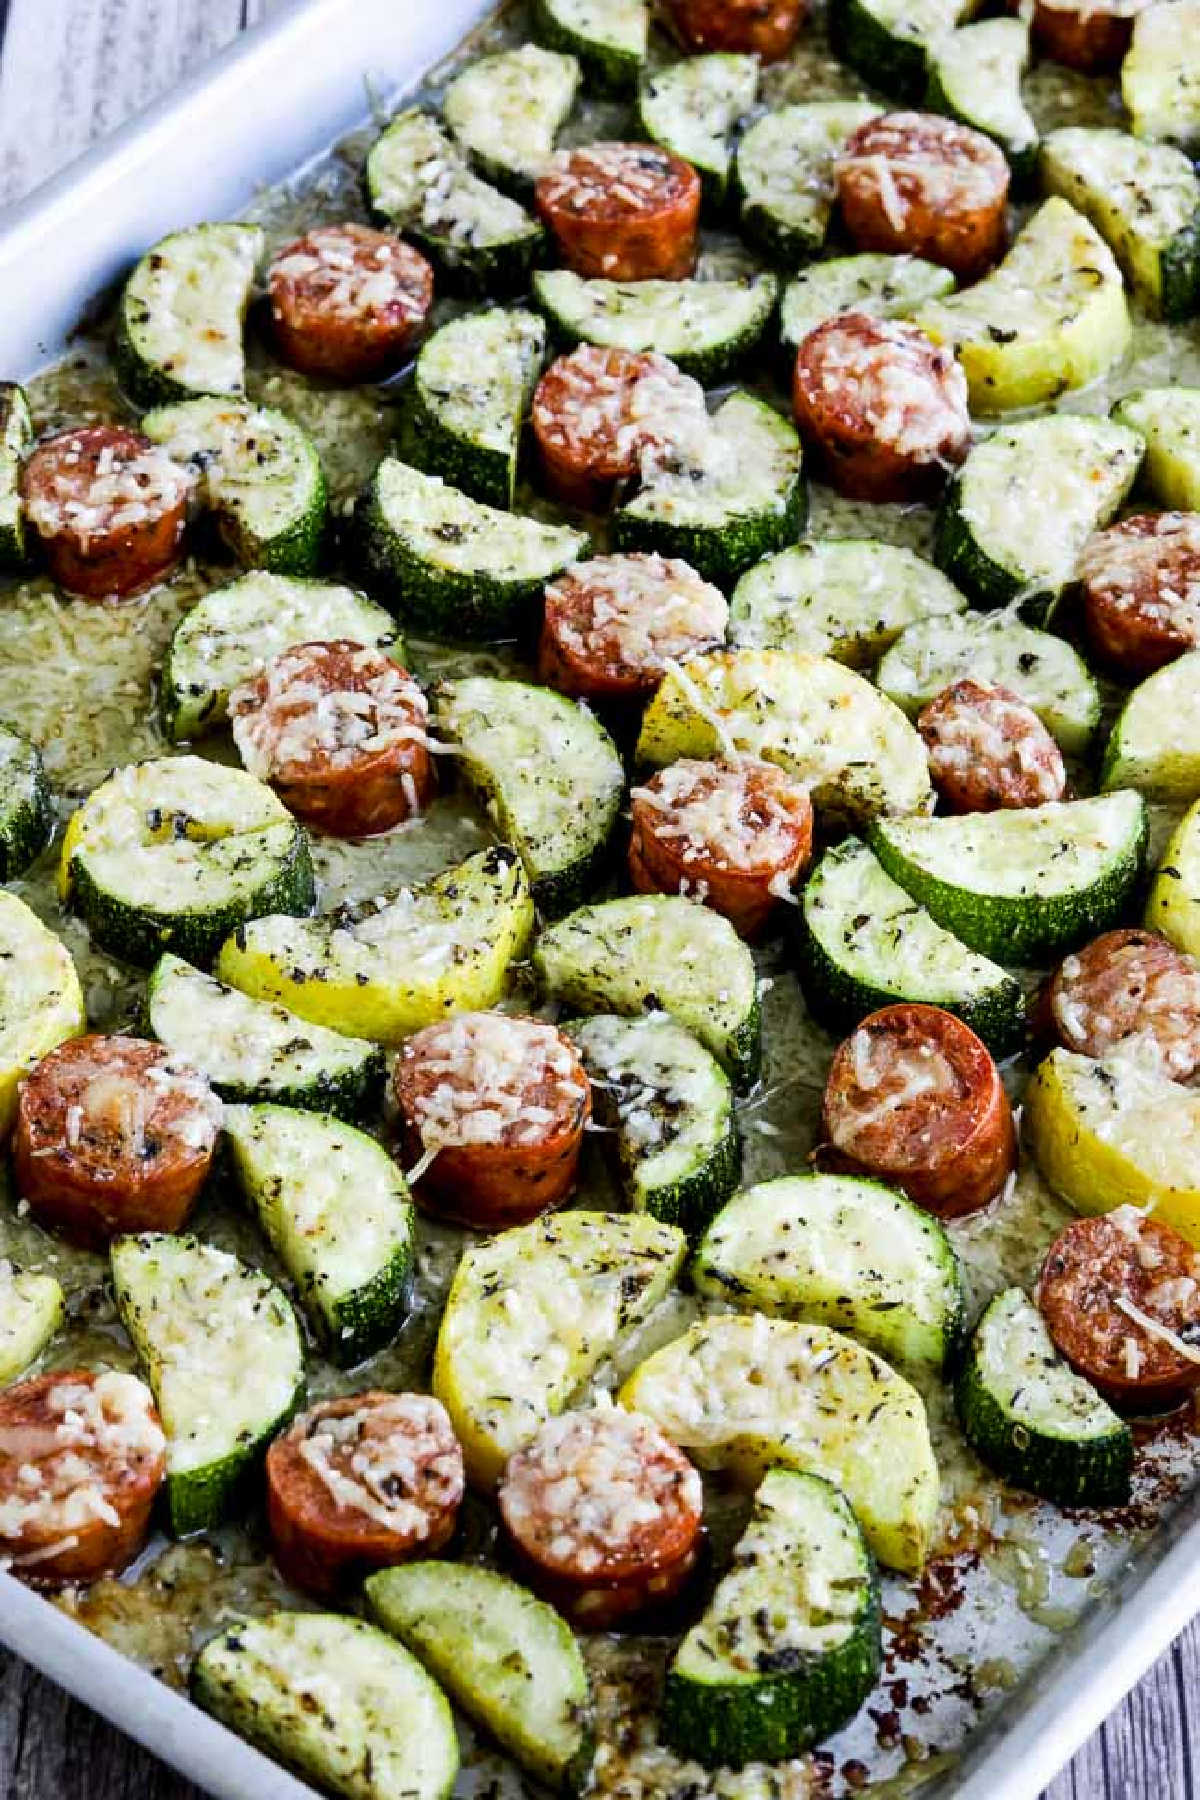 Cheesy Zucchini and Sausage Sheet Pan Meal shown on sheet pan with melted cheese